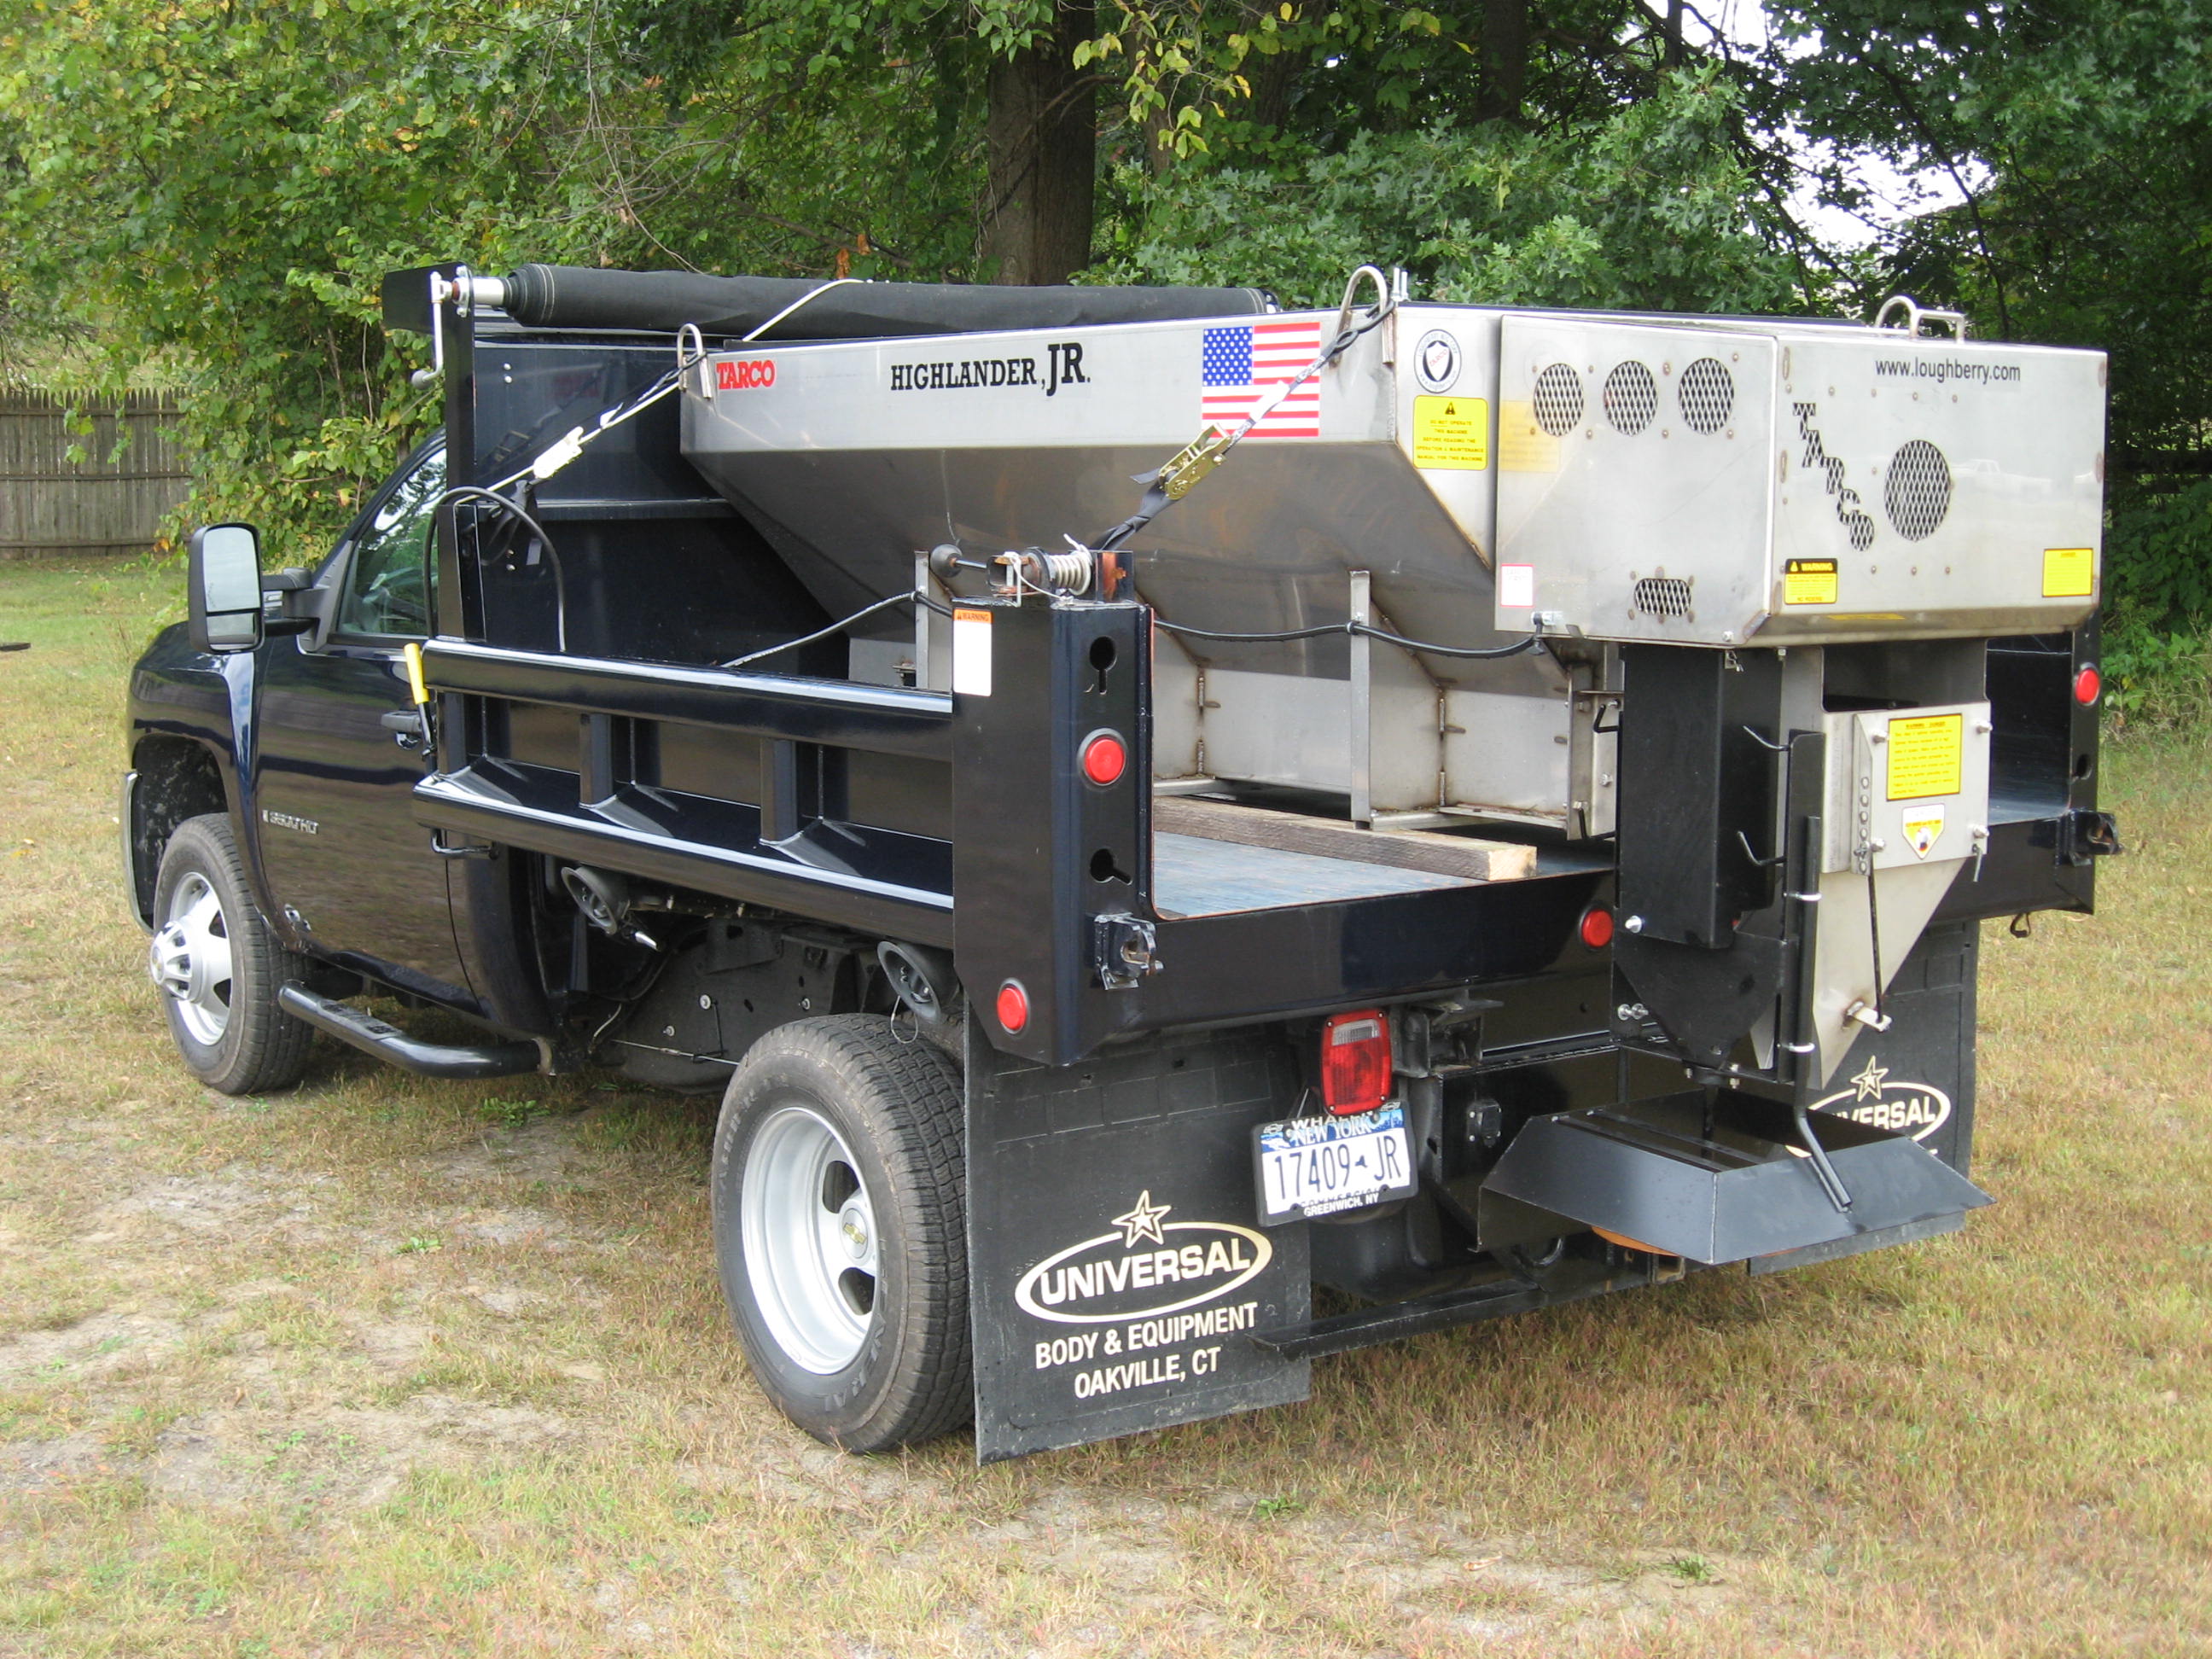 All season dump bodies, tire recycling machines, vacuum leaf loader boxes, salt and sand spreaders, v-box spreaders, and other municipal equipment manufactured by Loughberry Mfg. Corp. under the Tarco brand.